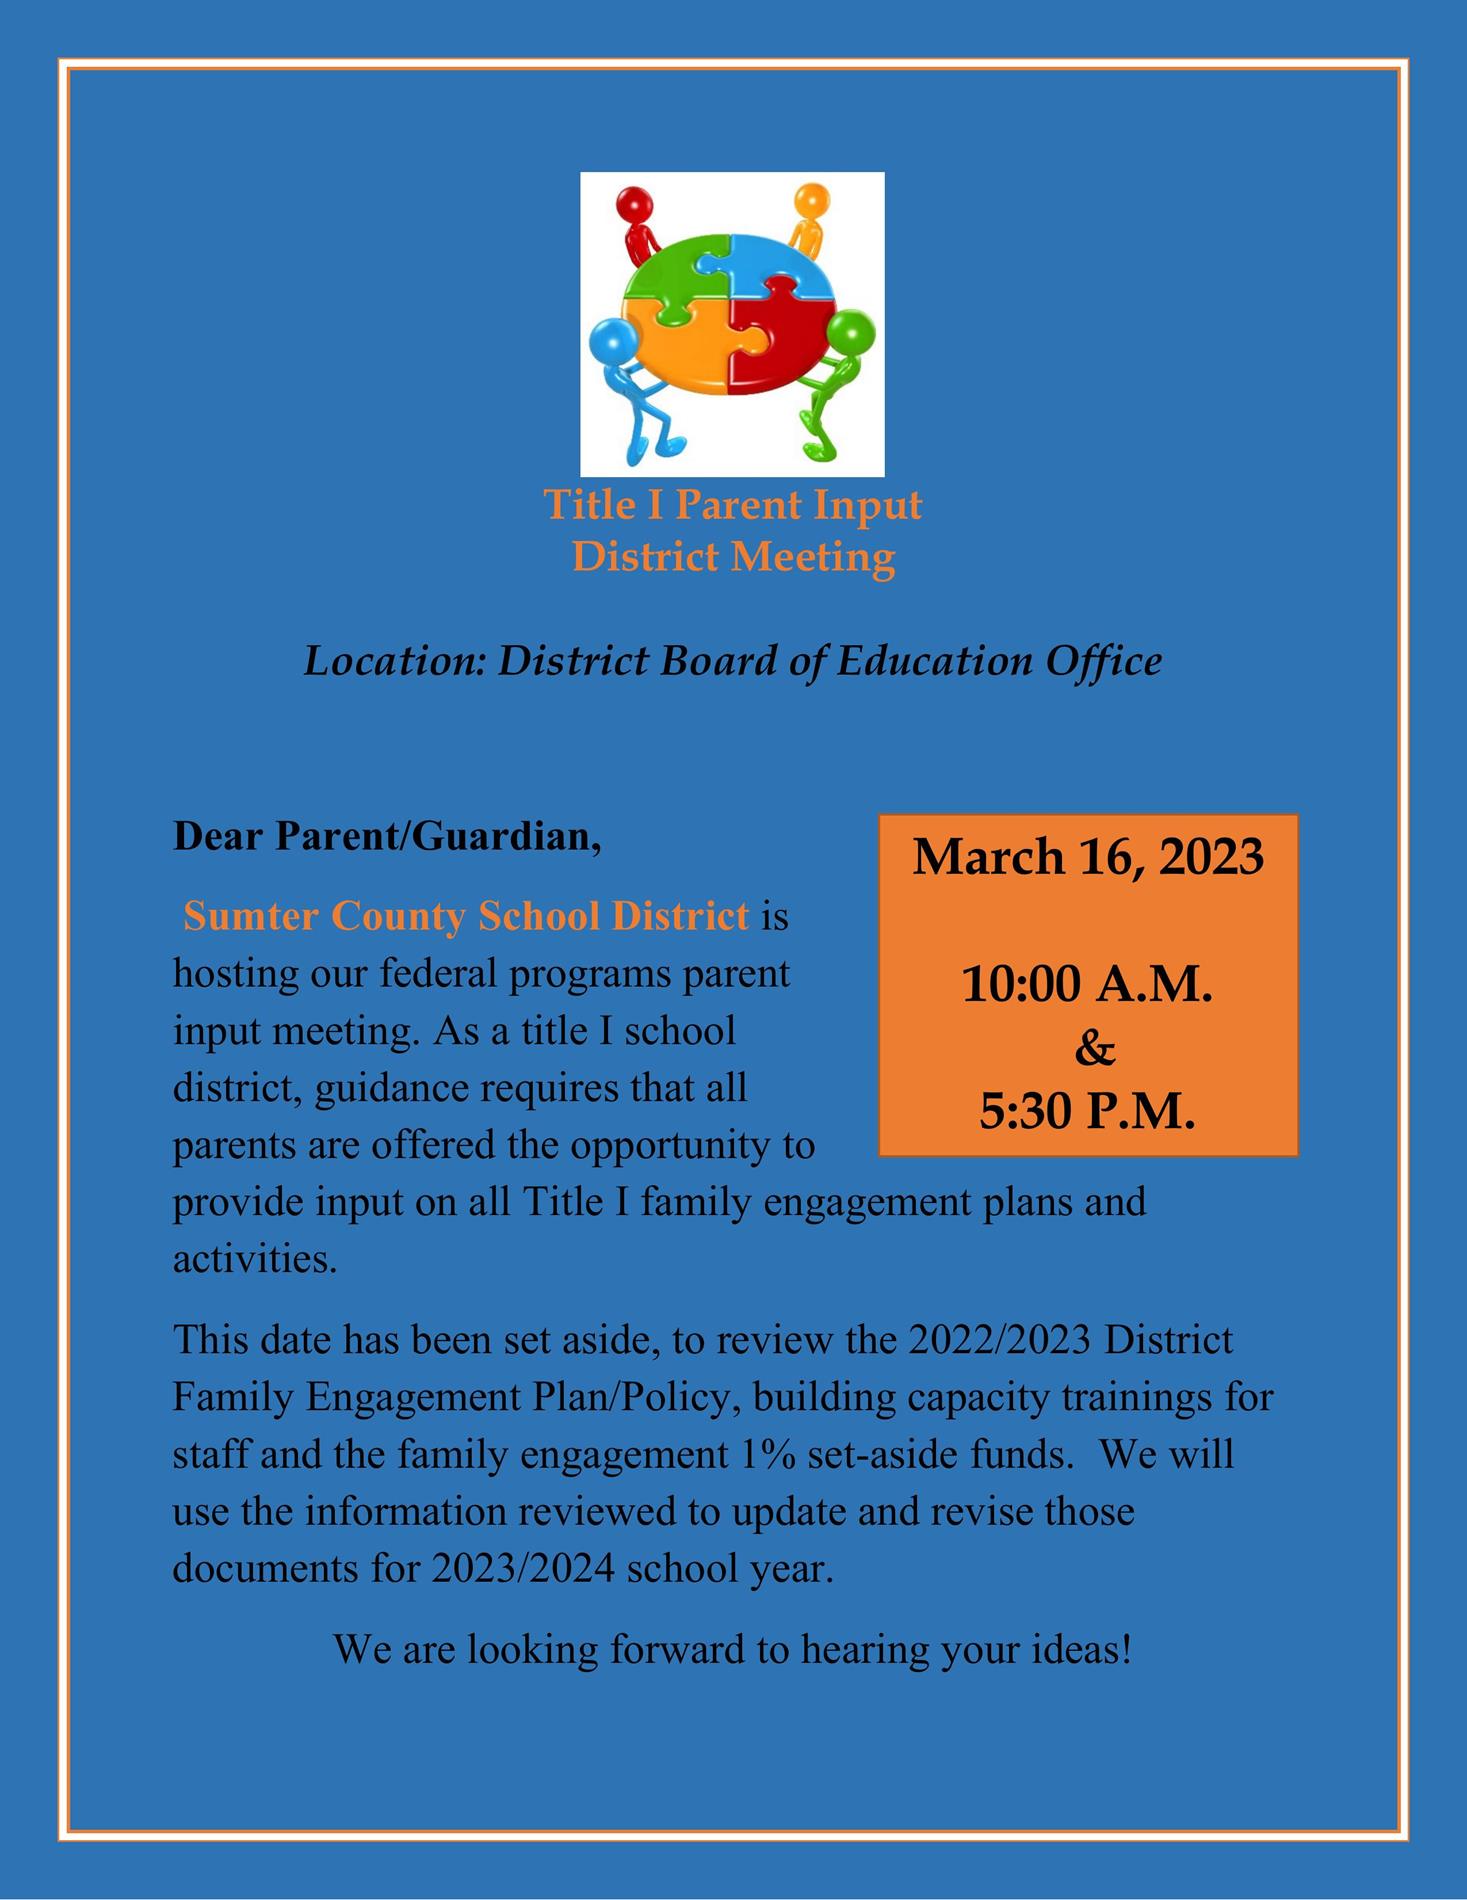 Title I Parent Input District Meeting March 16th